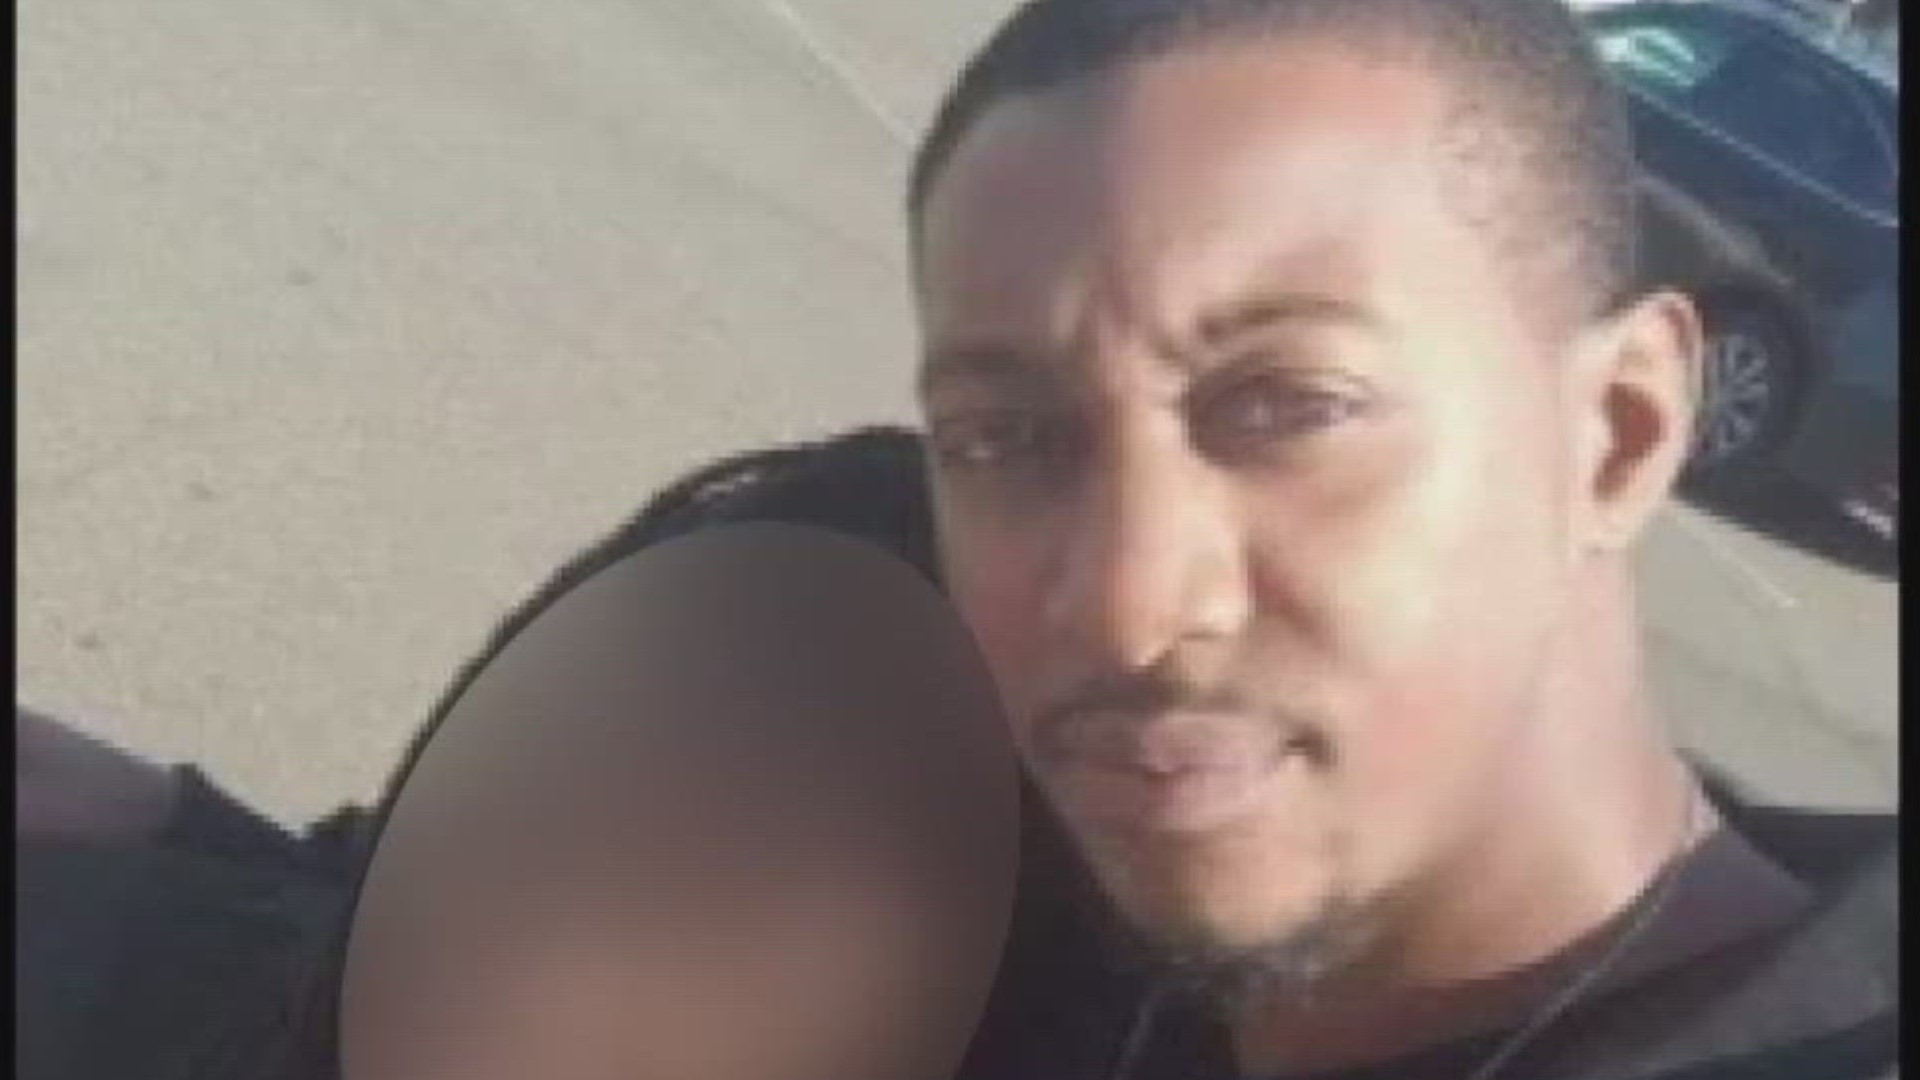 A couple from Cleveland, Ohio is calling for answers after their 35-year-old son was shot and killed at a South Sacramento apartment complex on Dec. 8.